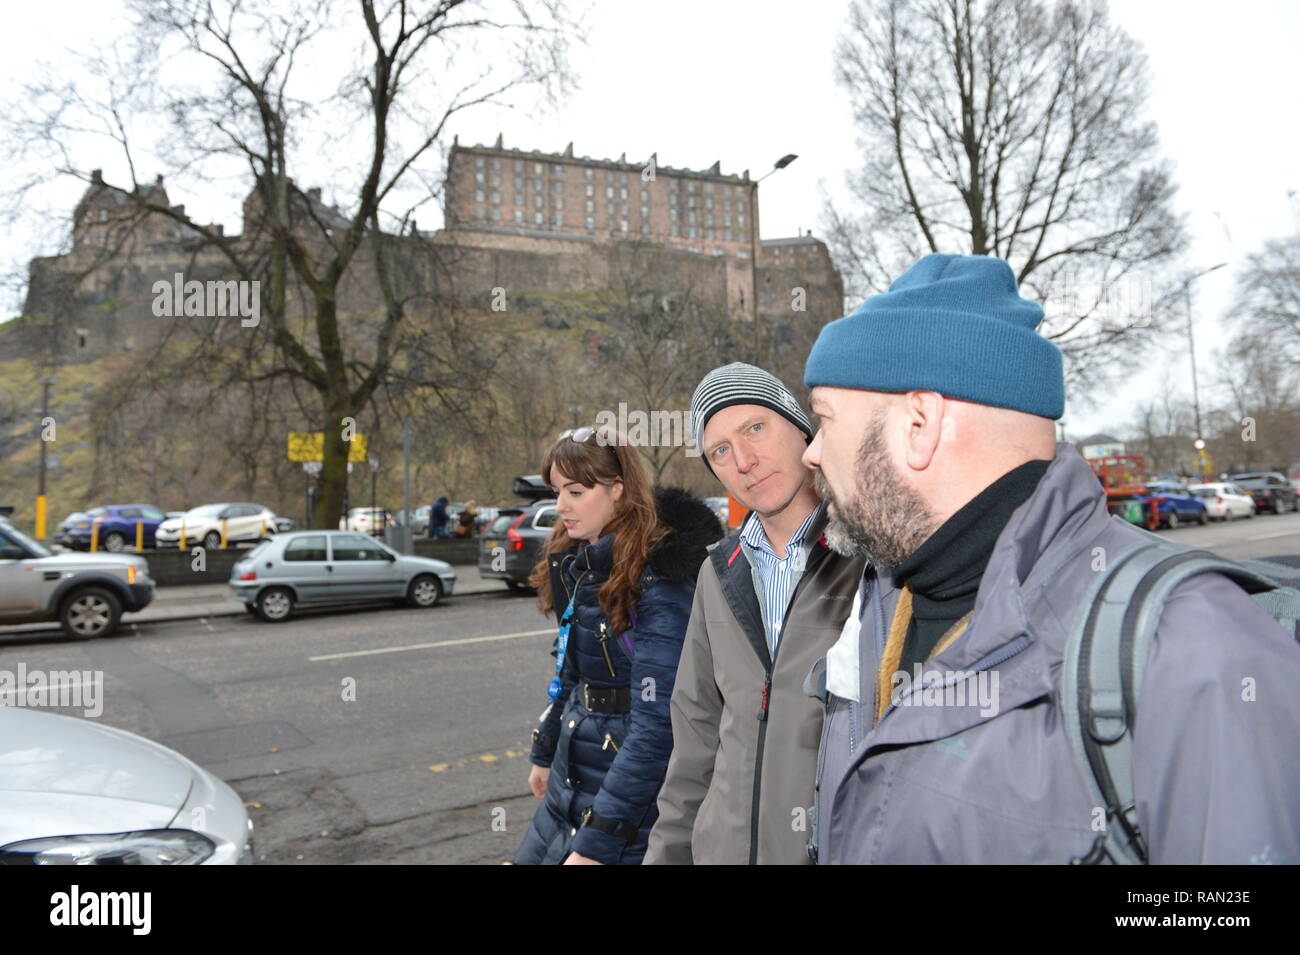 Edinburgh, Scotland, UK. 4th January, 2019. Public Health Minister Joe FitzPatrick joins the Edinburgh Access Practice Street Outreach Pharmacist on a walkabout around Edinburgh. The service provides essential primary health care for homeless patients (Left - Right: Lauren Gibson - Outreach Pharmacist; Joe FitzPatrick - Public Health Minister; David Miller - Streetwork Councillor). Edinburgh, UK - 4th January 2019. Credit: Colin Fisher/Alamy Live News Stock Photo